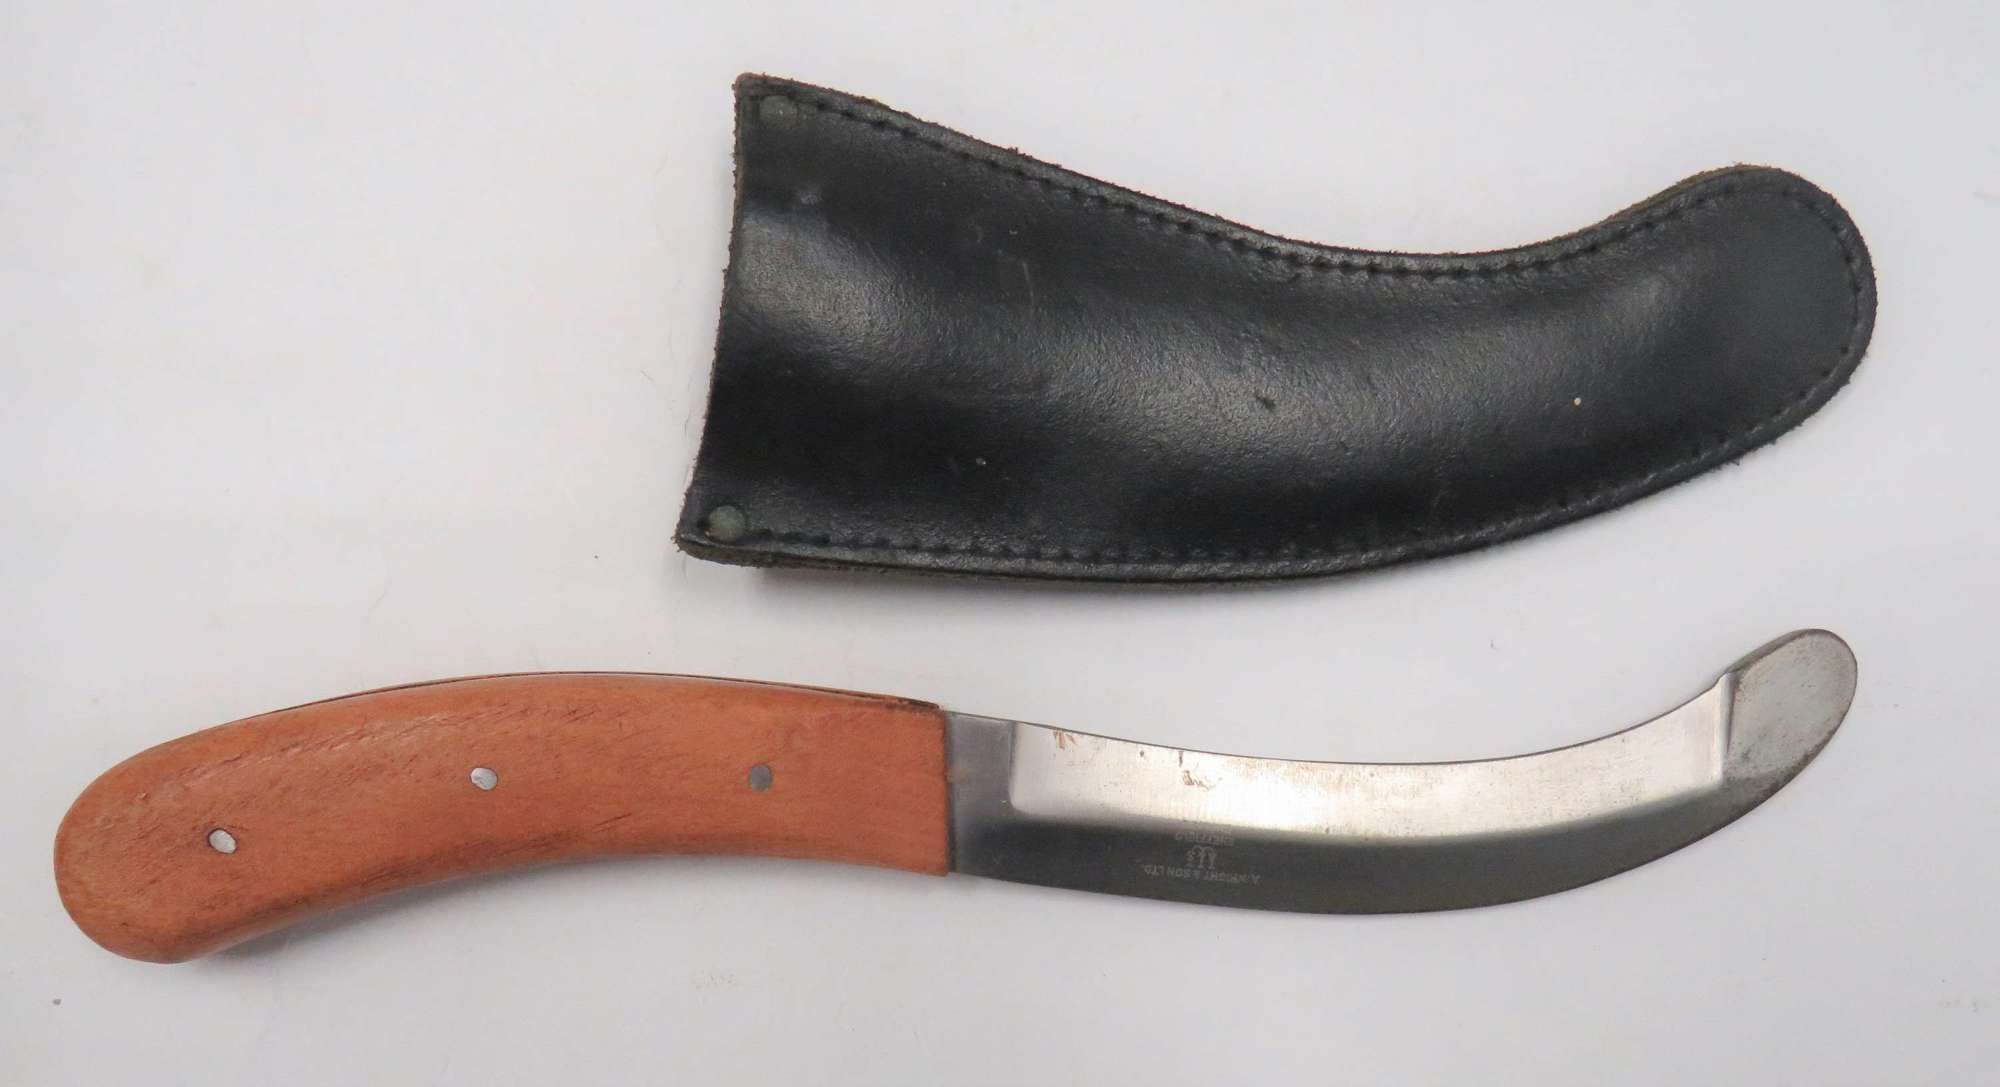 Un-issued Royal Air Force Issue Dingy Knife